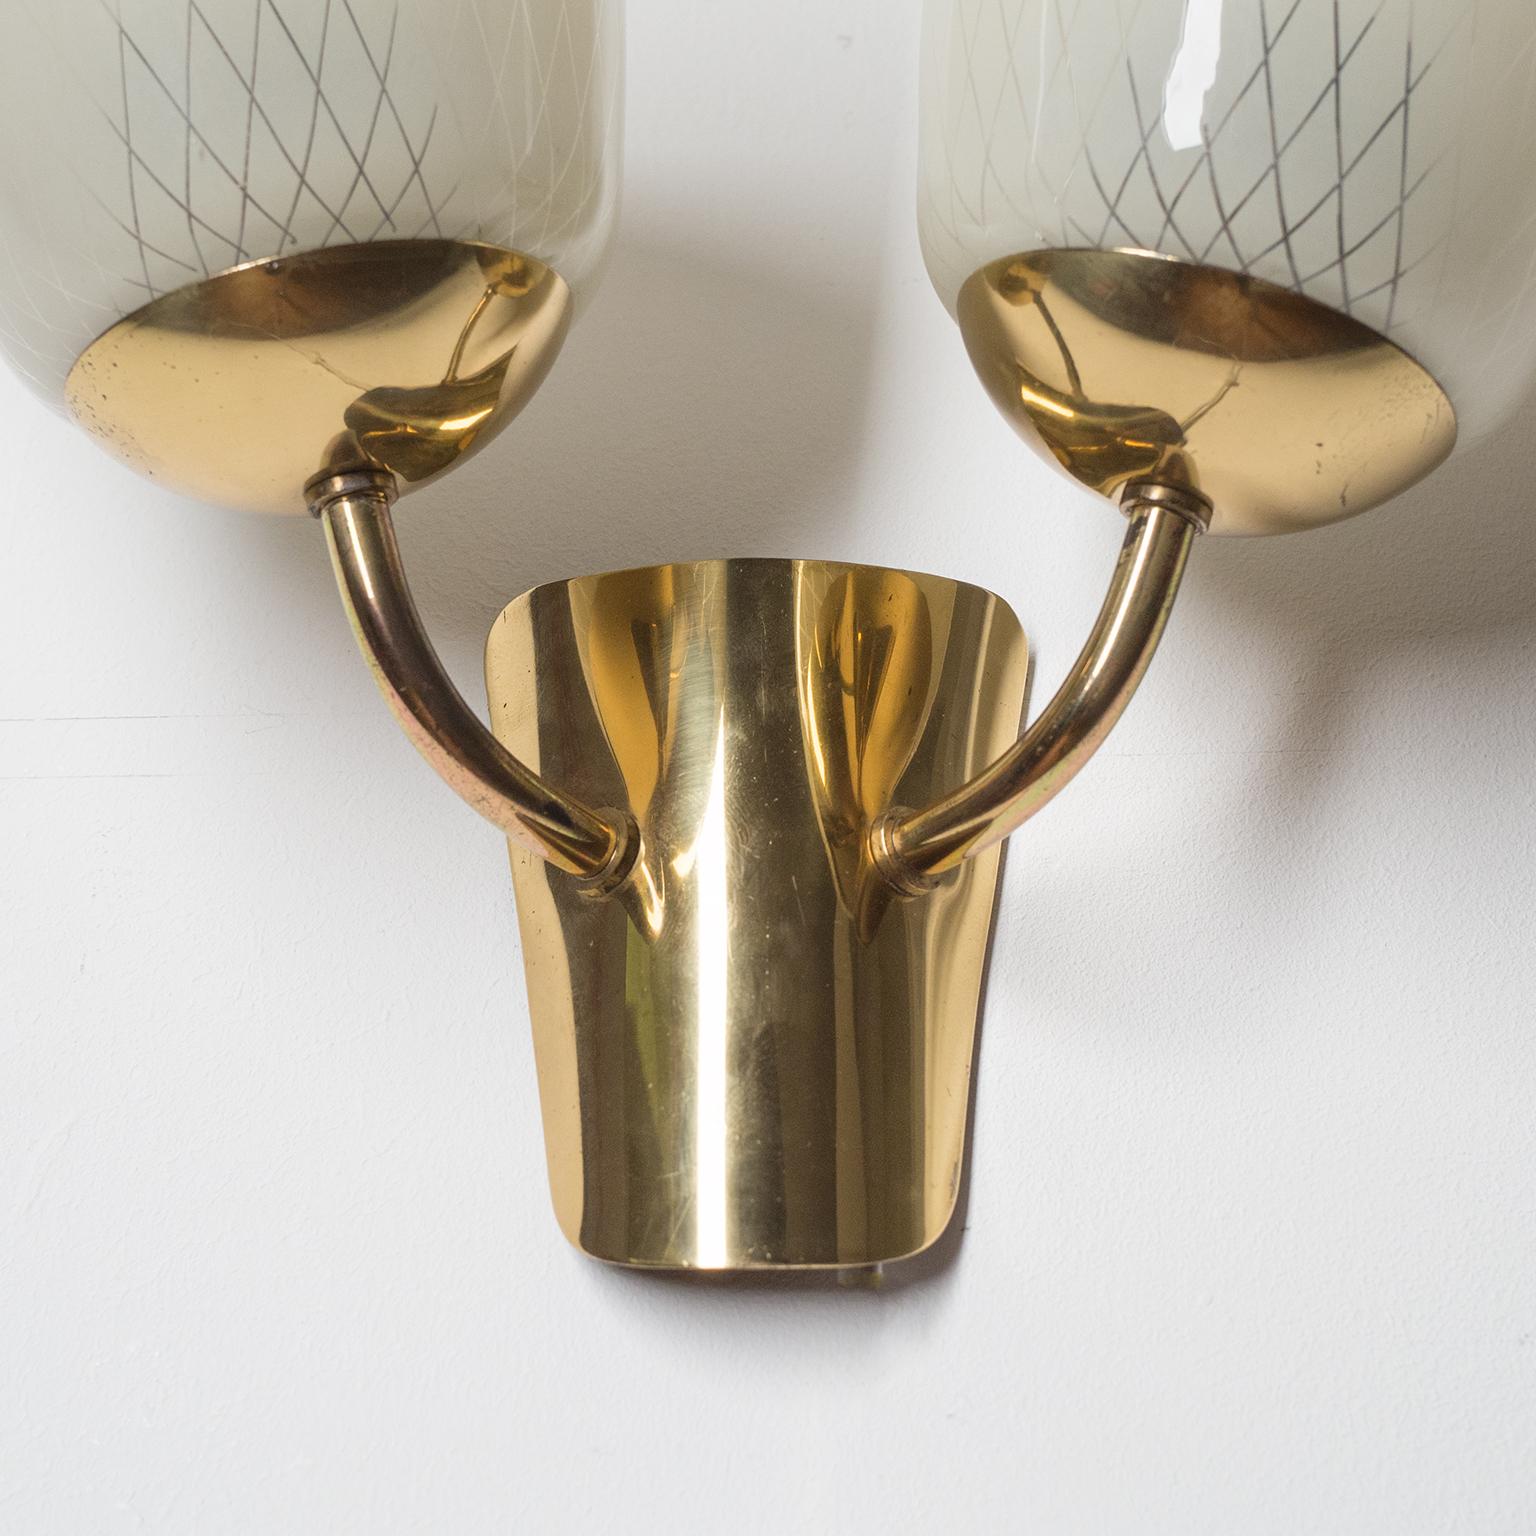 Mid-20th Century Two-Arm Wall Lamp, 1940s, Enameled Glass and Brass